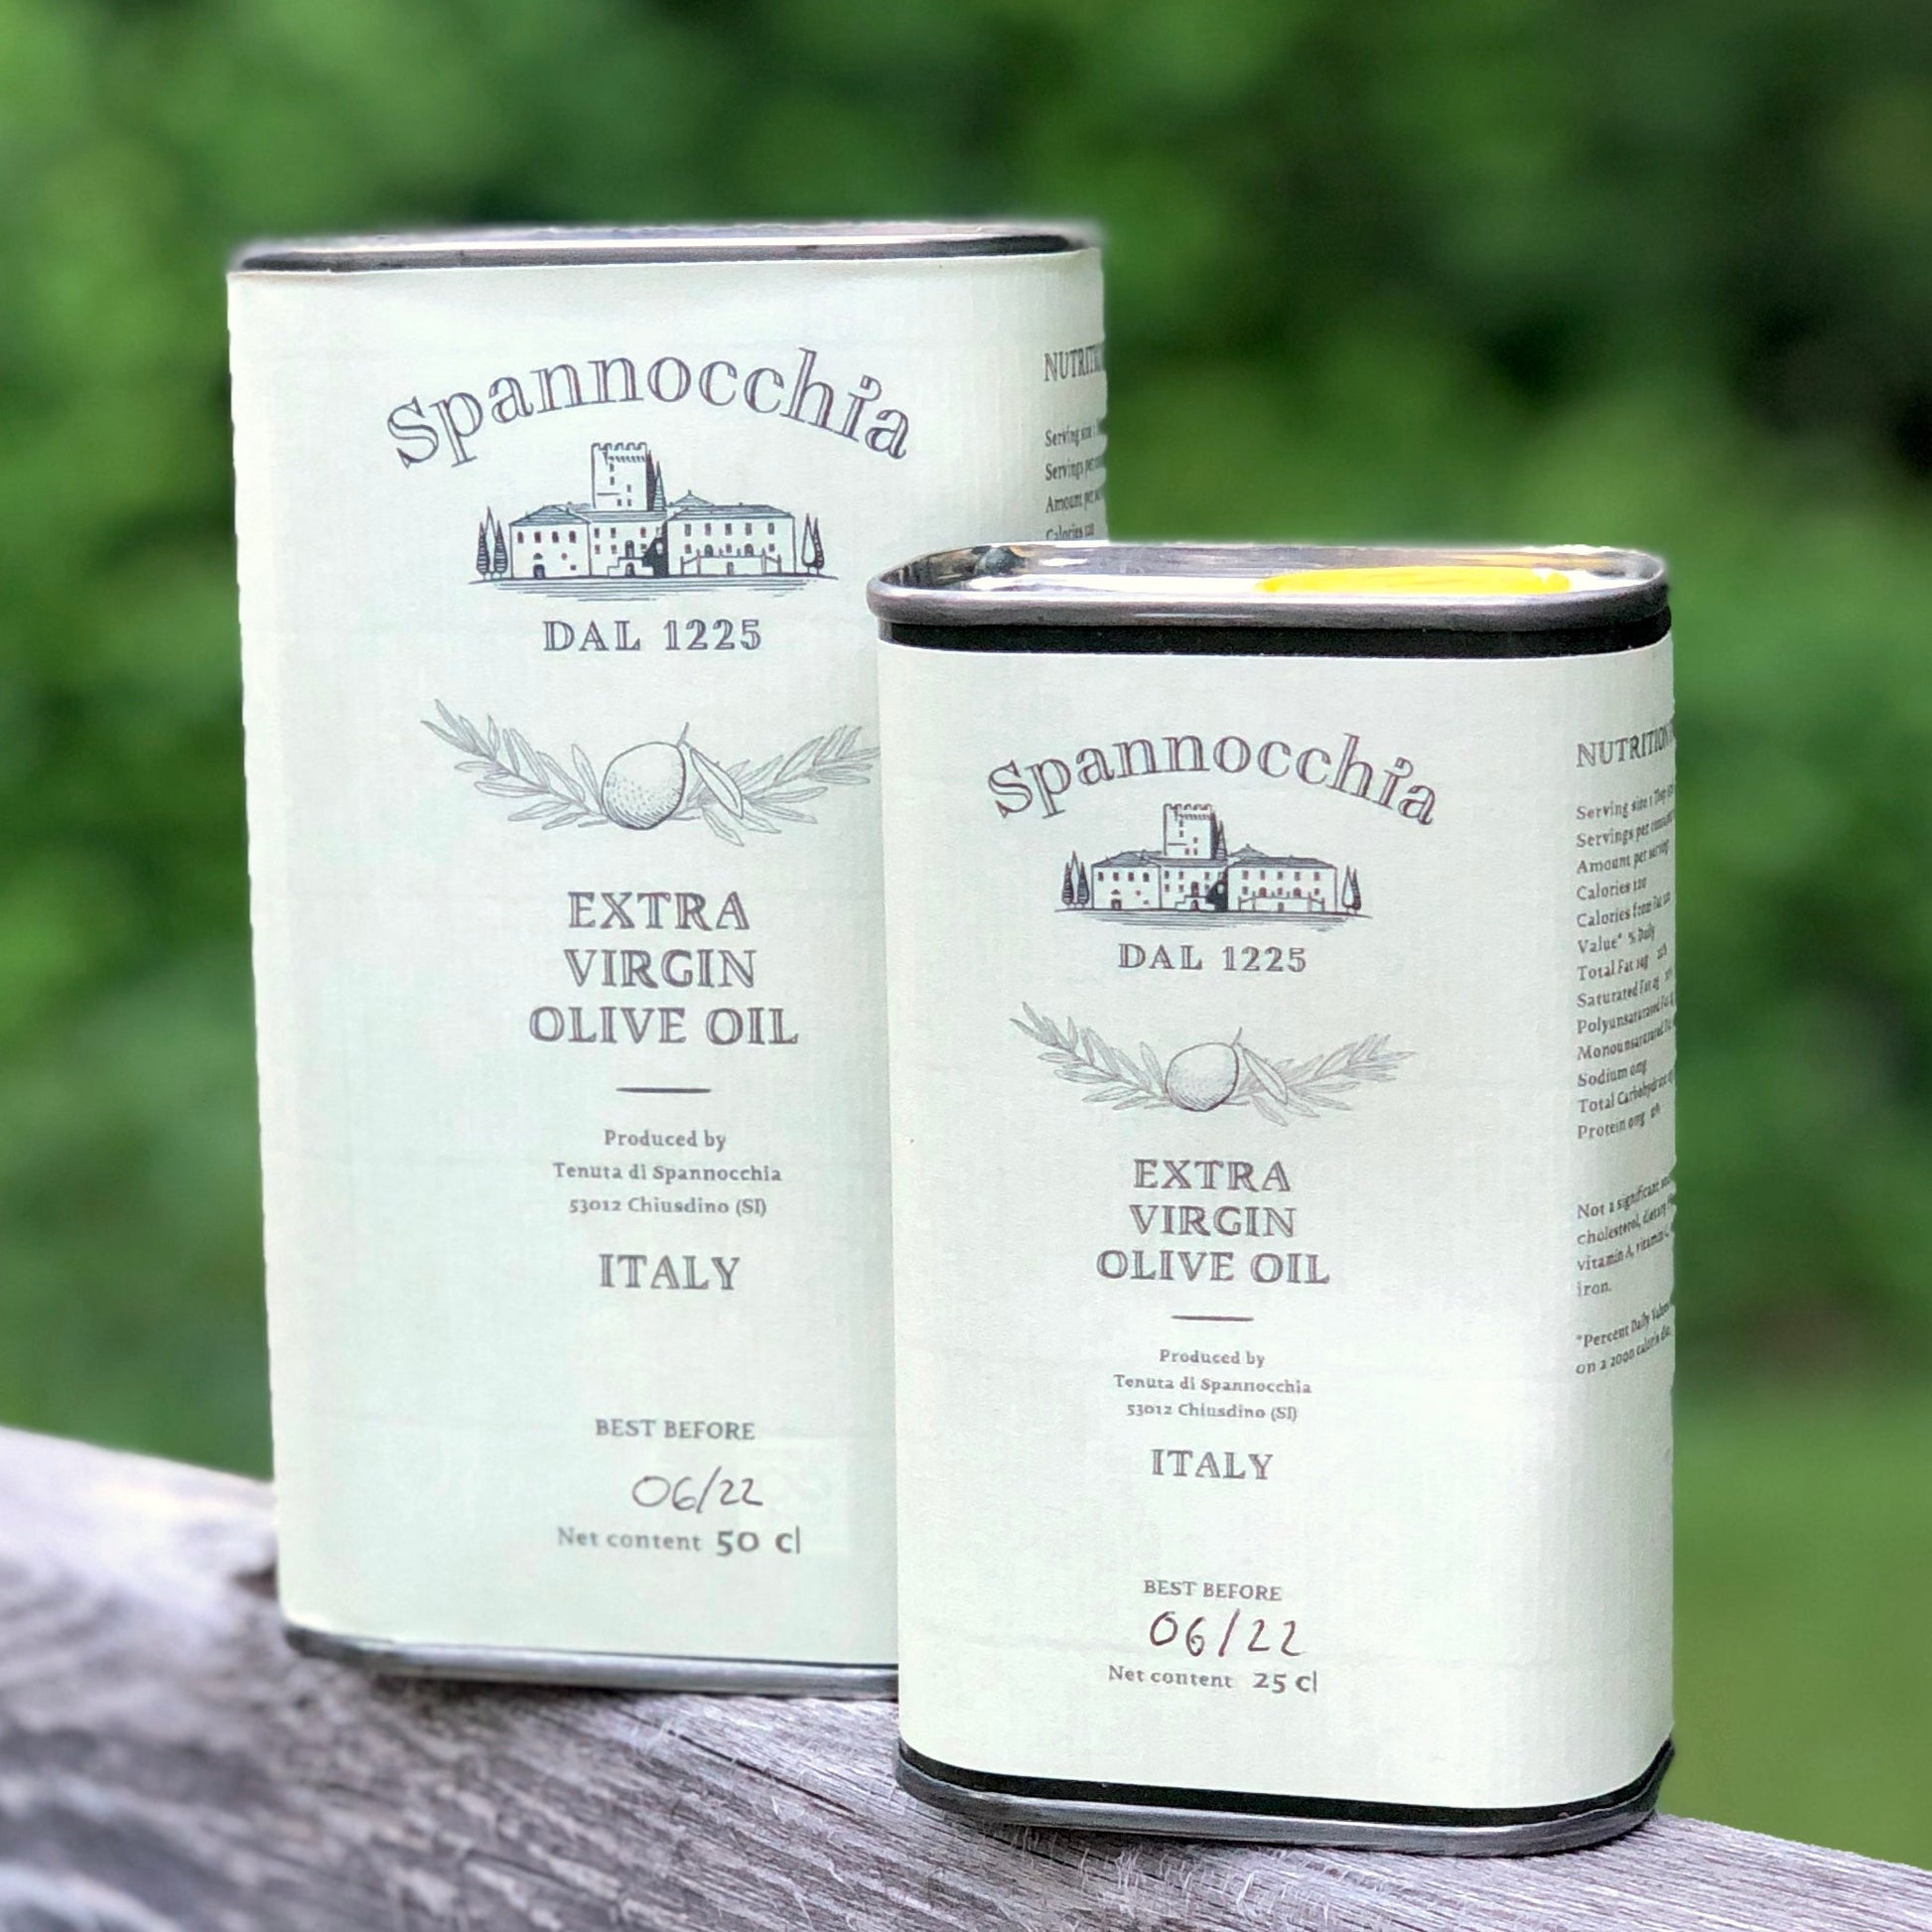 Two cans of Spannocchia olive oil with blurred foliage in the background.